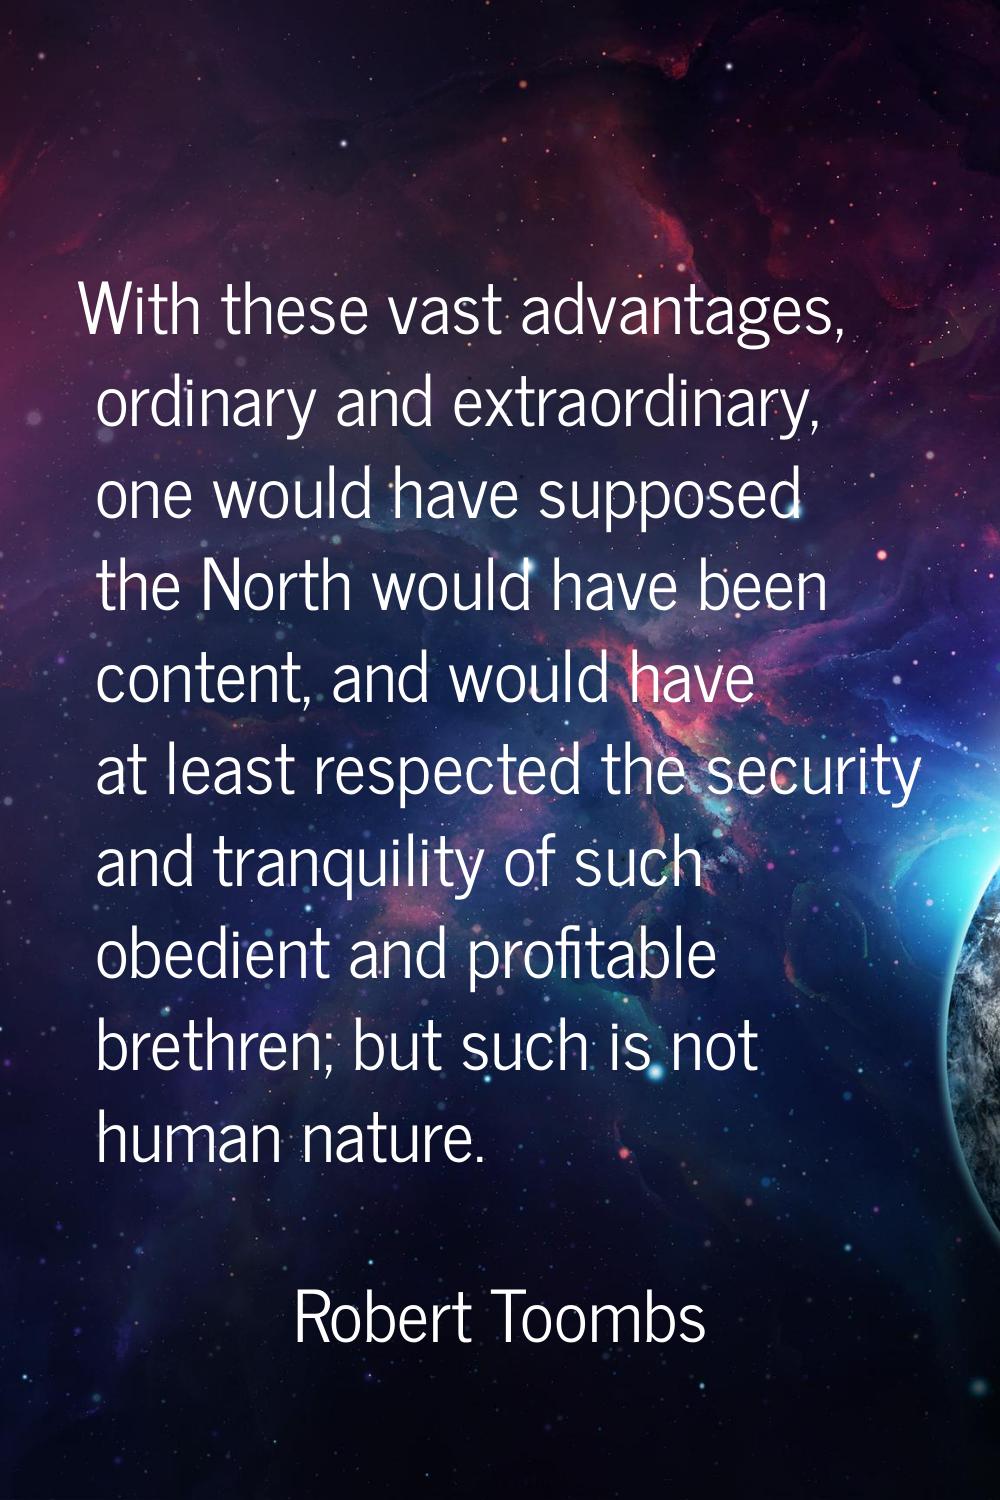 With these vast advantages, ordinary and extraordinary, one would have supposed the North would hav